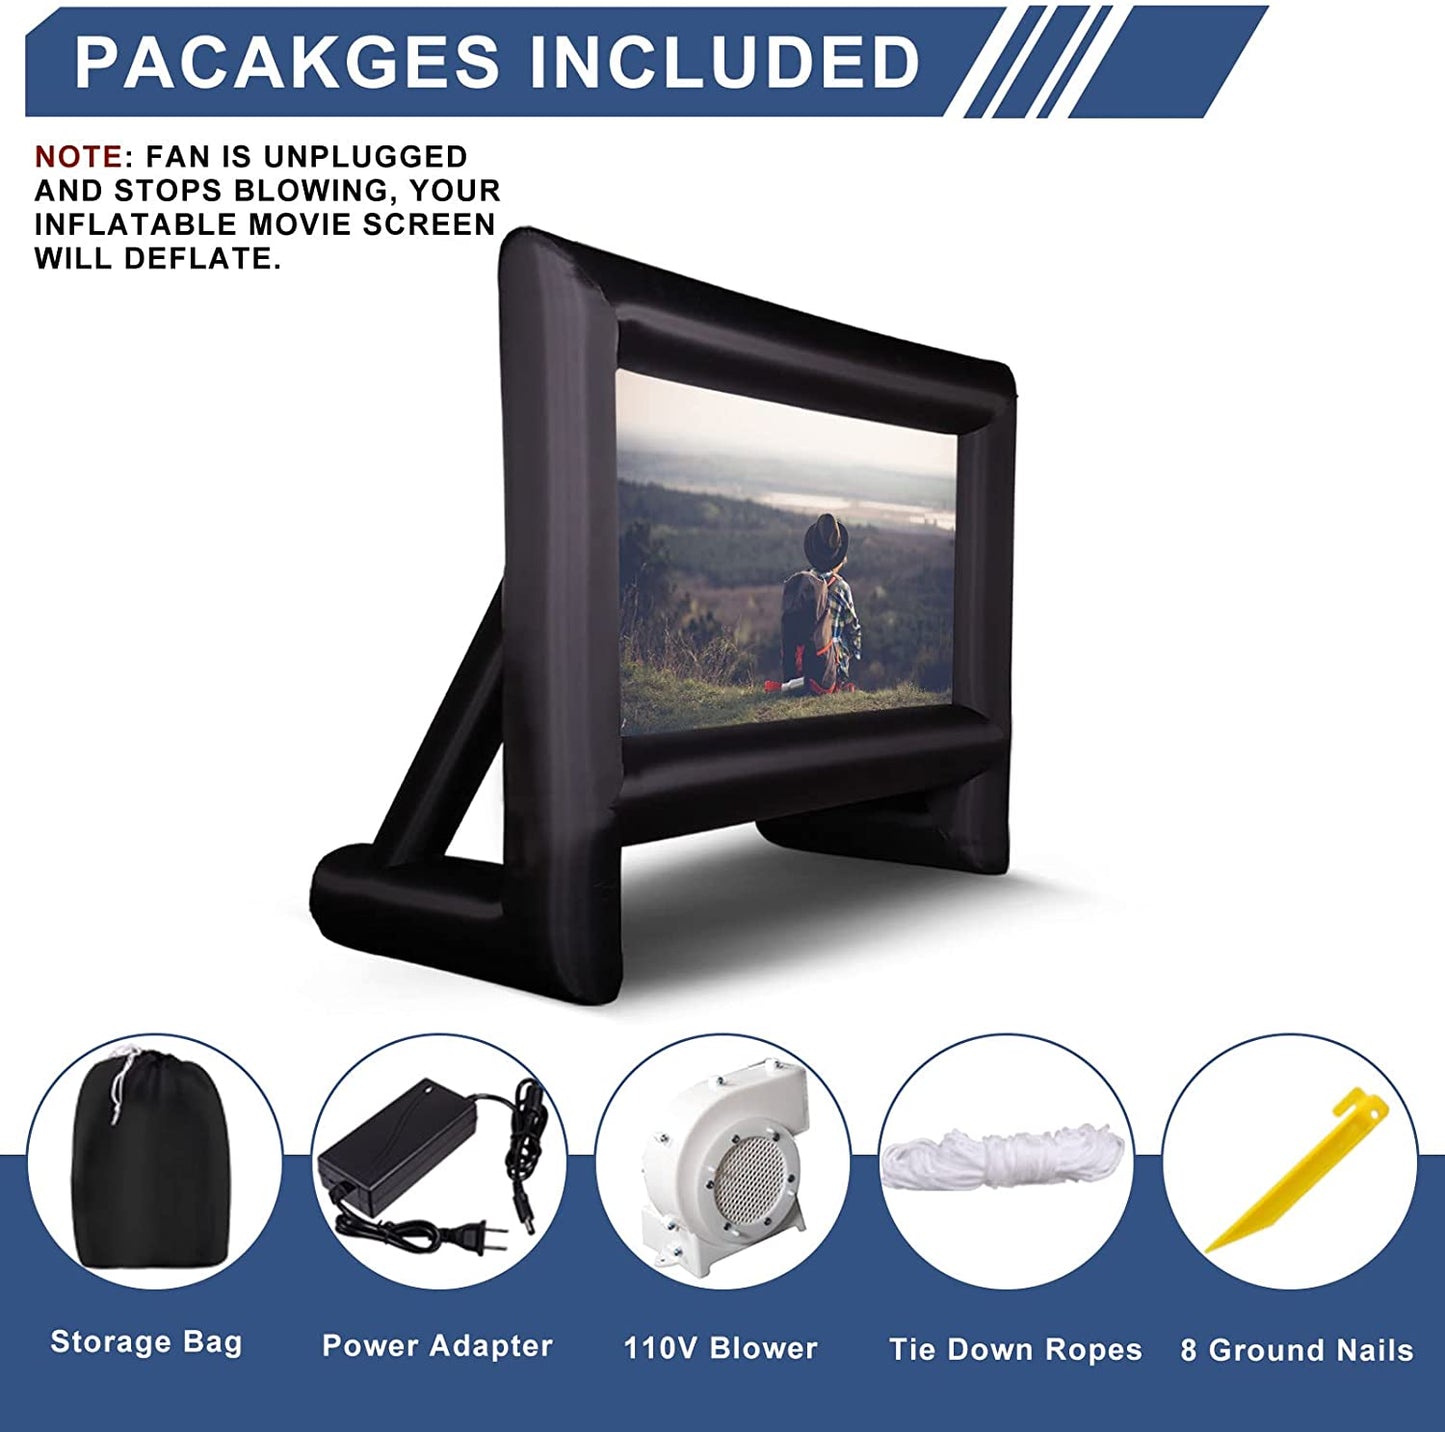 Package contents for a giant inflatable outdoor movie screen. The contents includes, a storage bag, power adapter, 110v blower, tie down ropes and 8 ground nails.